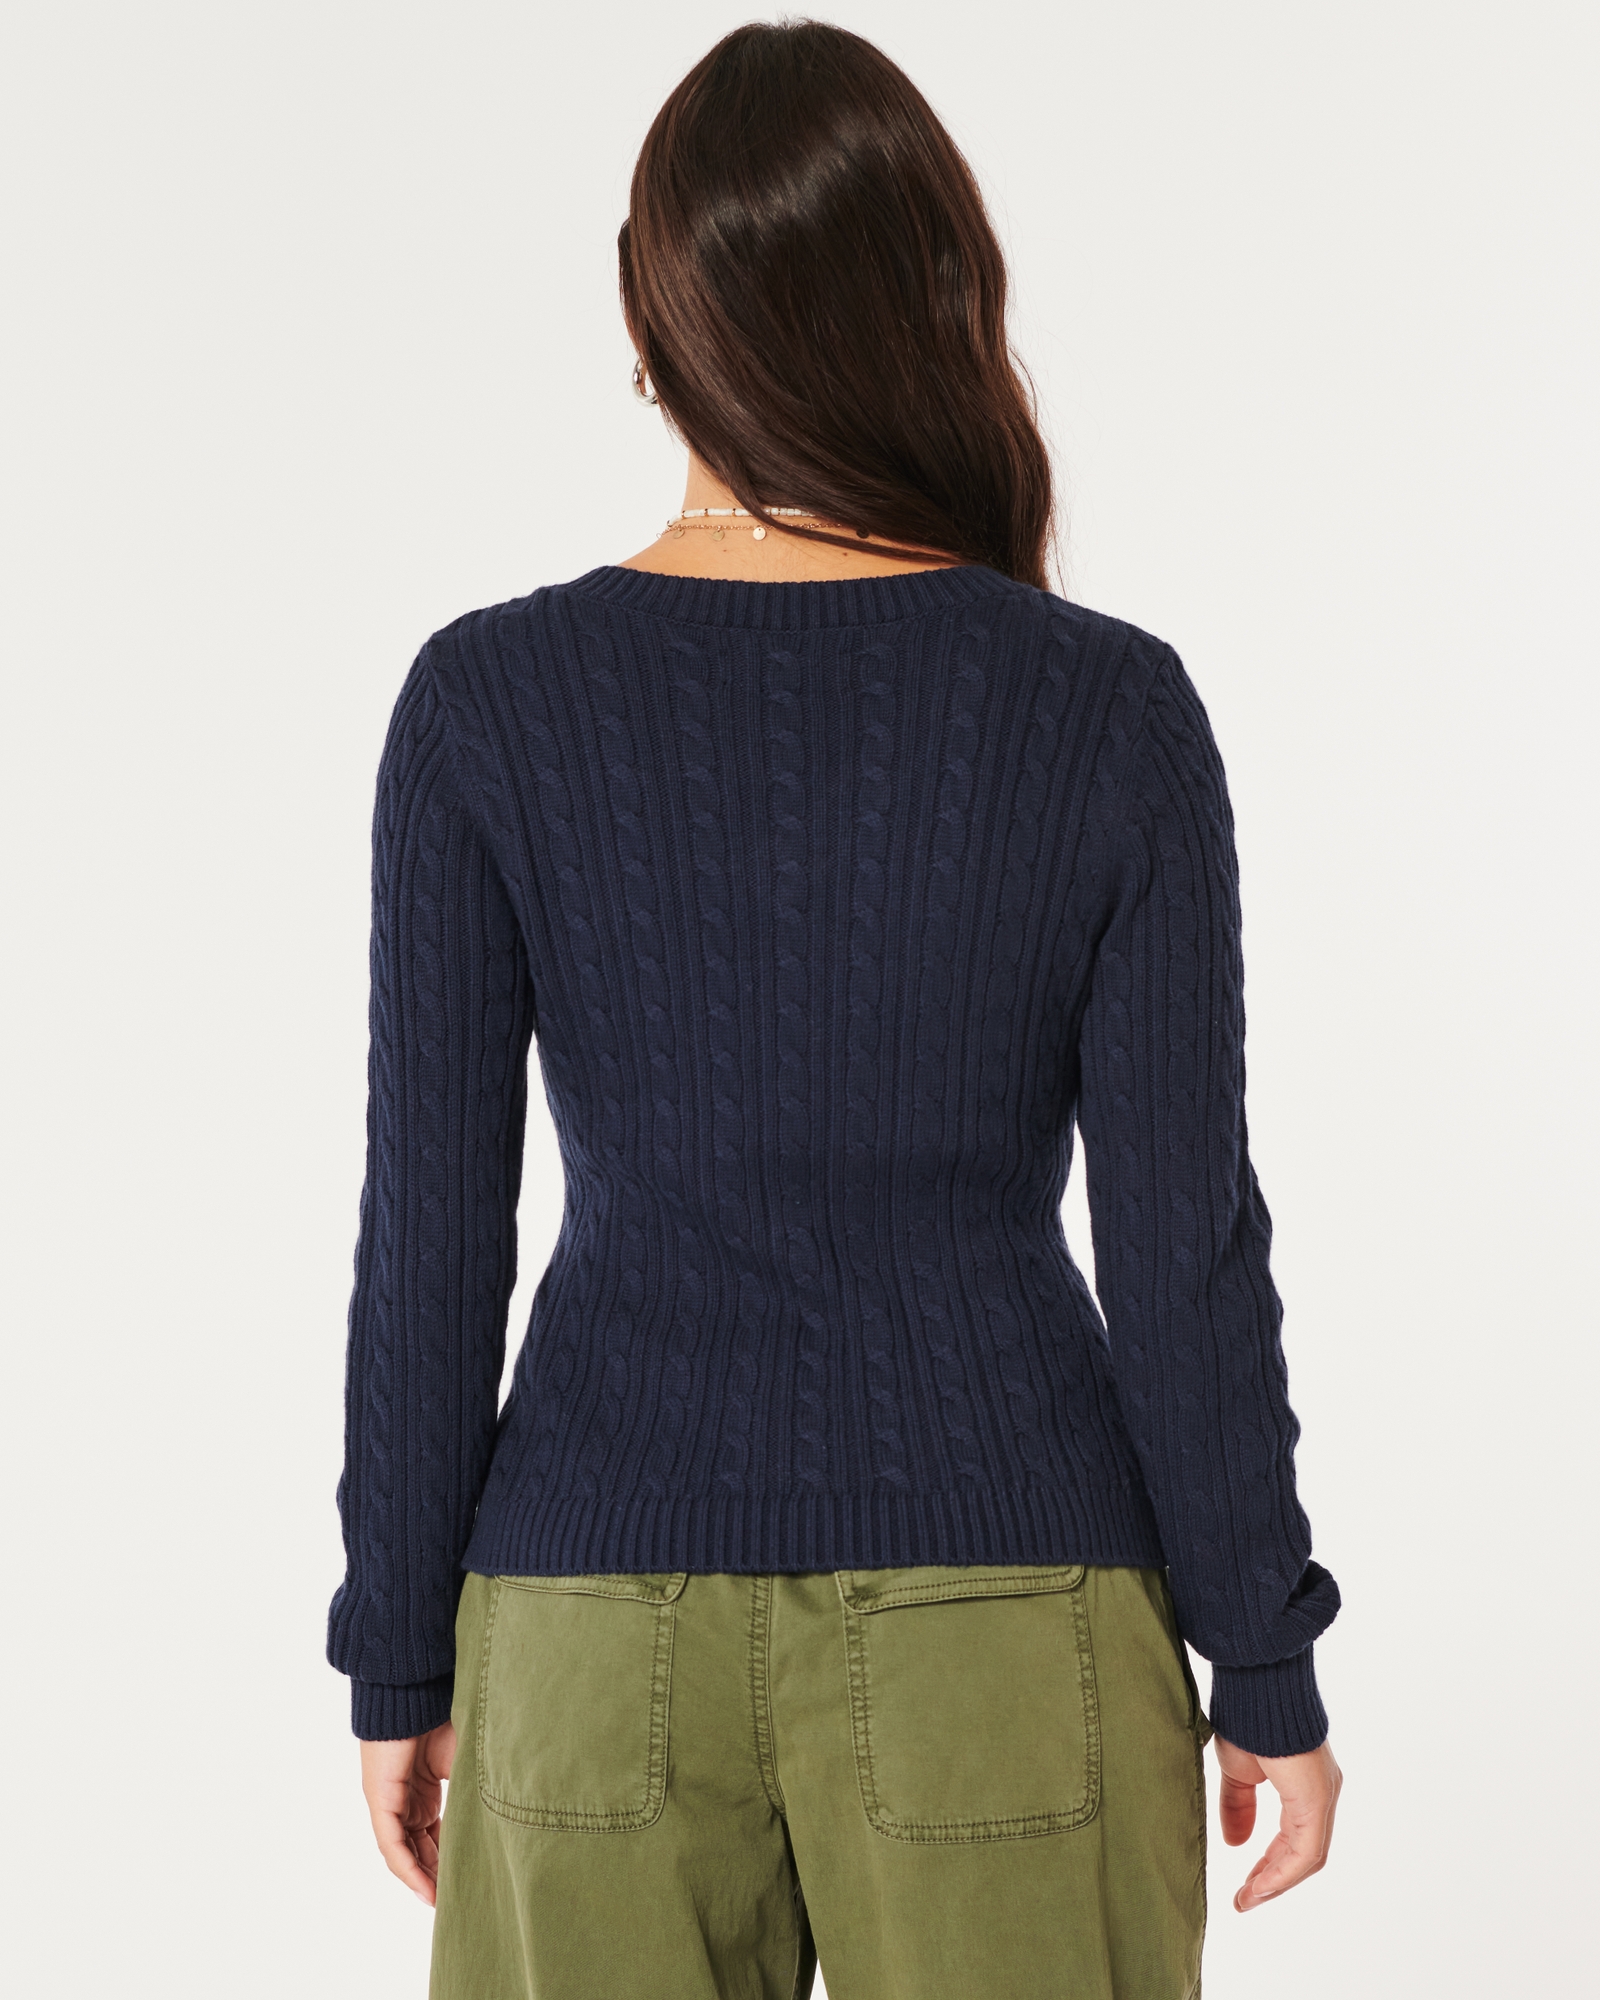 Gilly Hicks Cotton Long Sleeve Jumpers & Cardigans for Women for sale